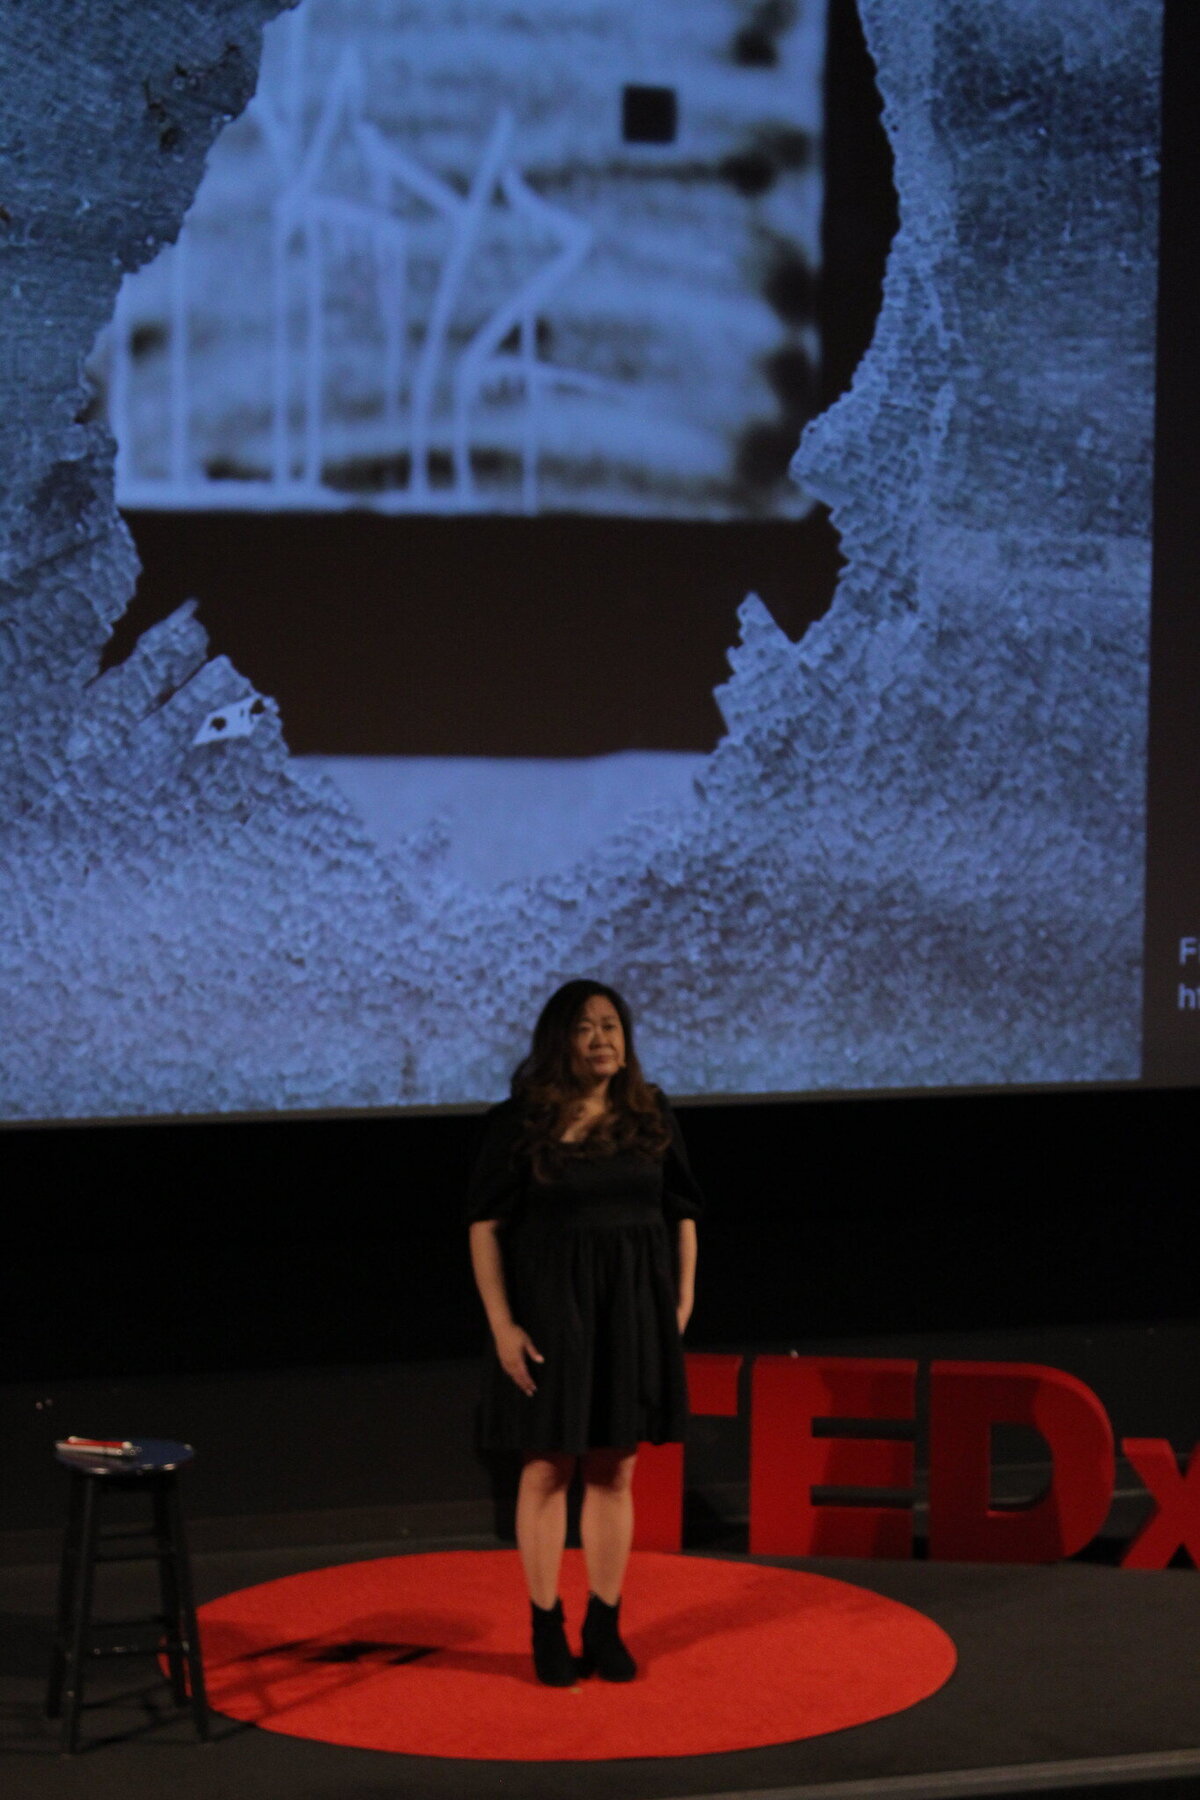 Anne standing at centre TEDxSFU stage with screen image of a window broken demonstrated by a hole through it